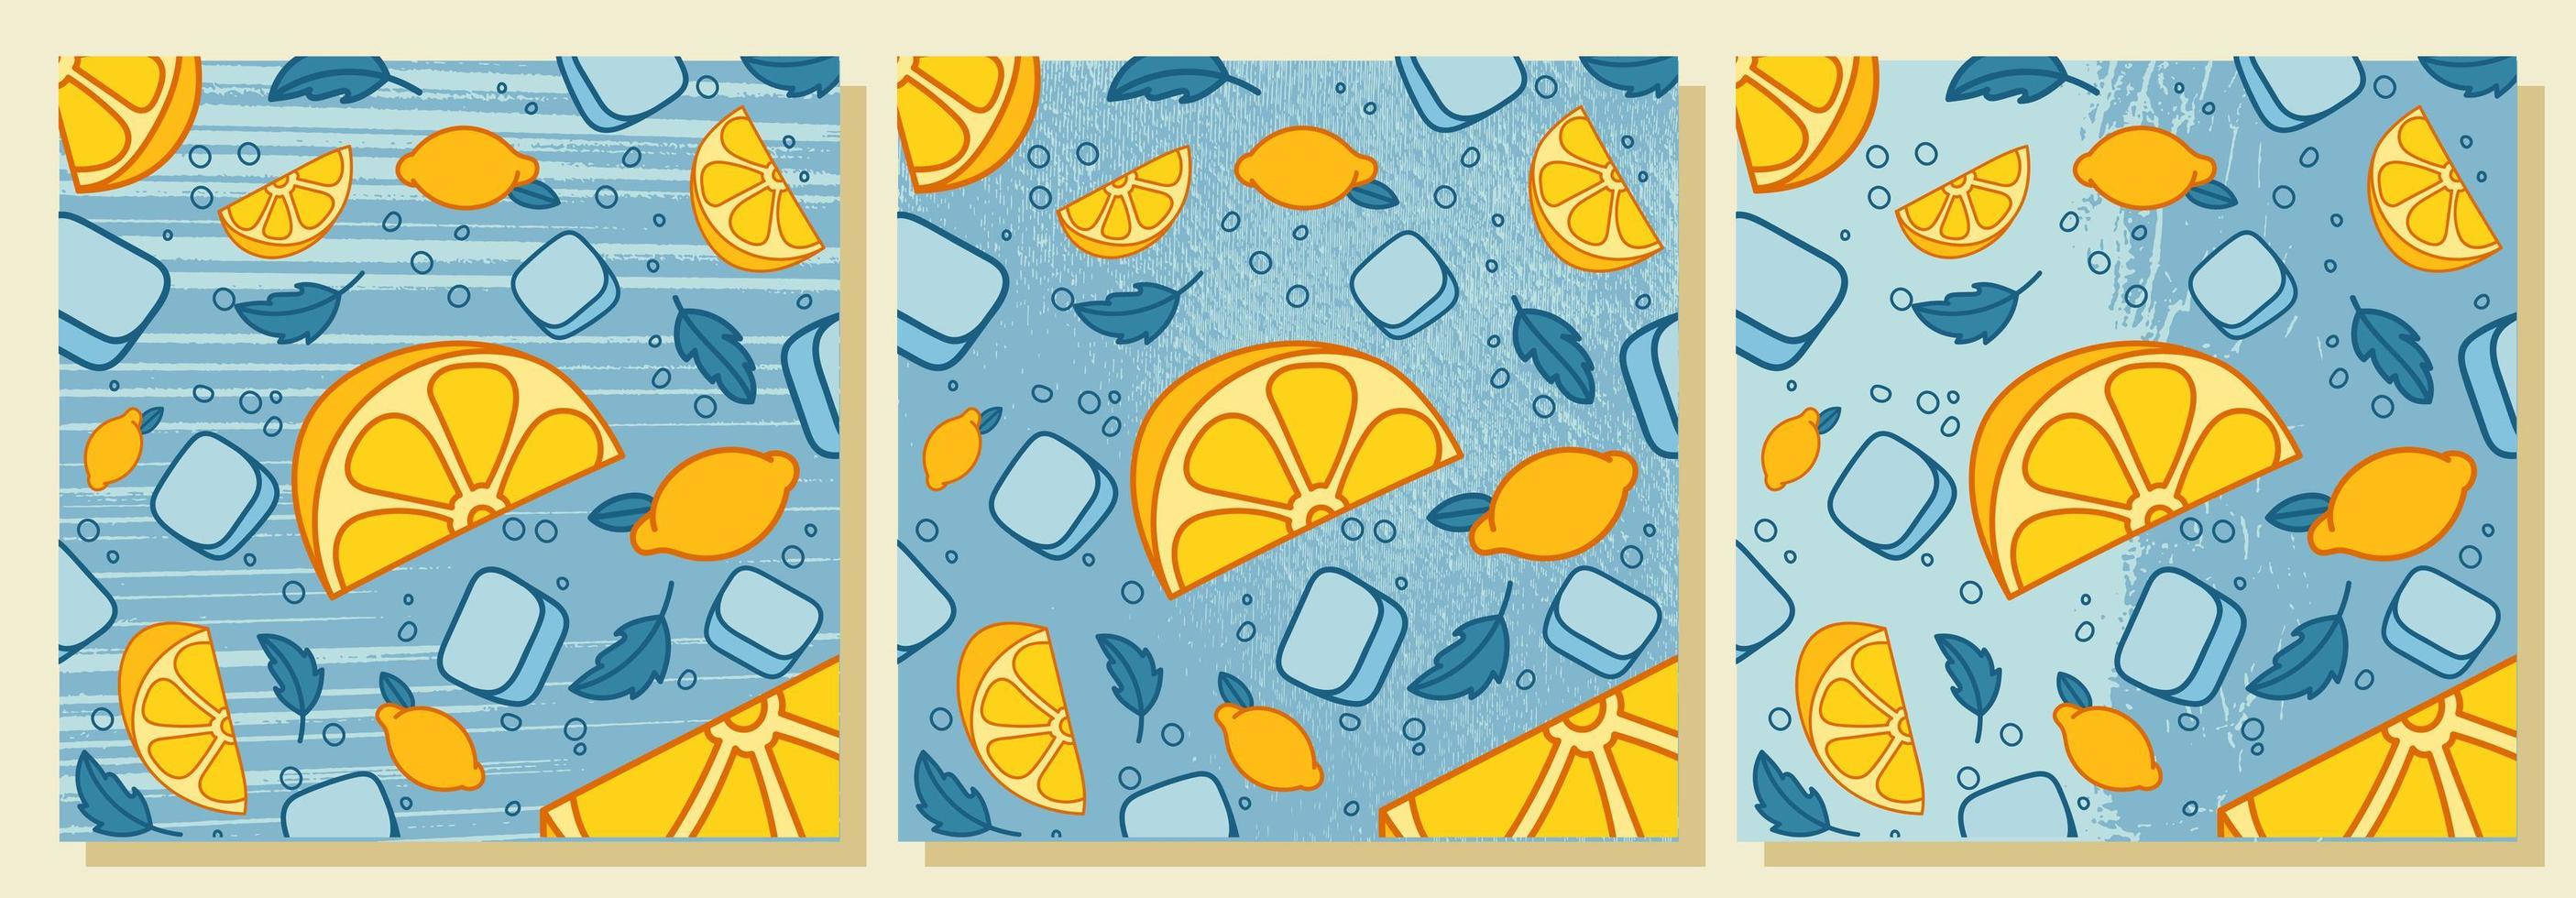 Fresh lemonade with mint and ice cubes. Lemon slices, mint leaves. Vector illustration with textures.